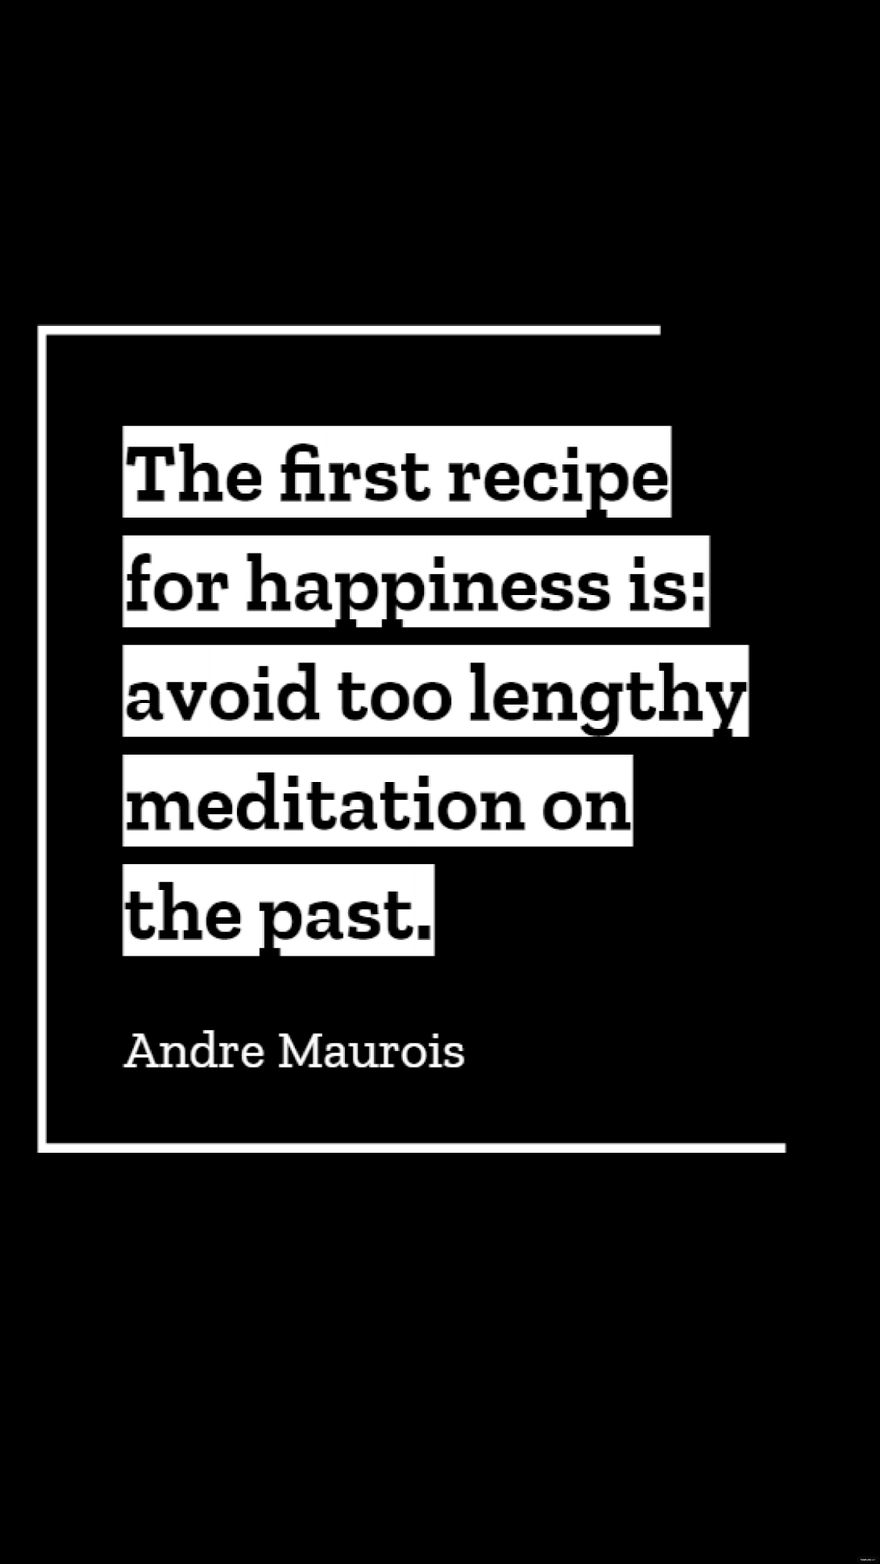 Free Andre Maurois - The first recipe for happiness is: avoid too lengthy meditation on the past. in JPG